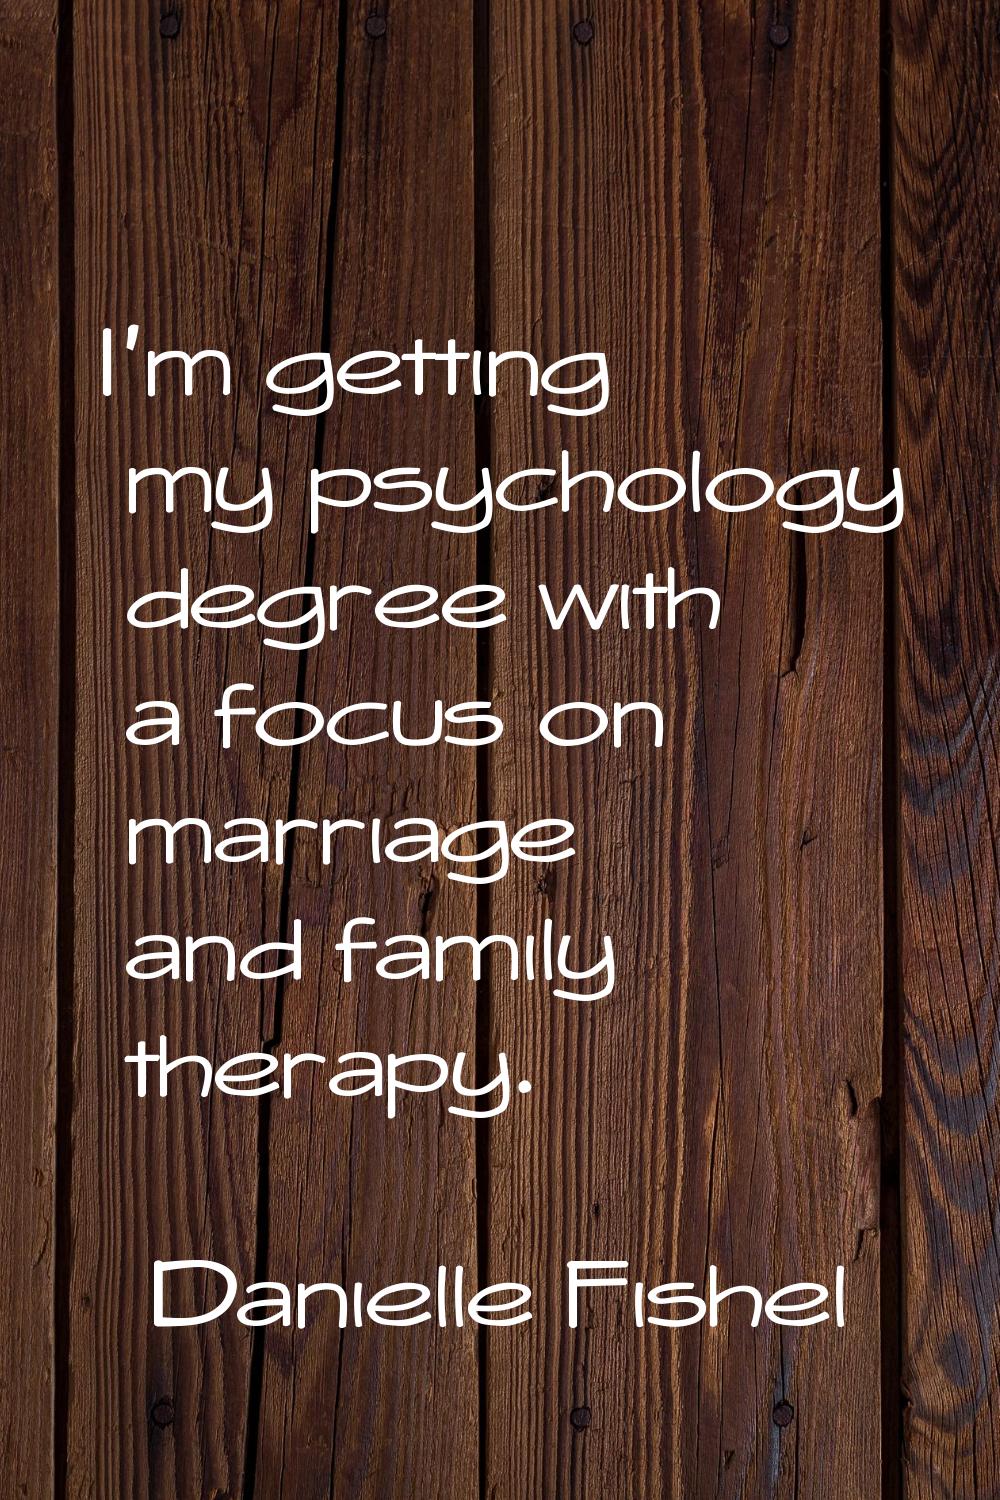 I'm getting my psychology degree with a focus on marriage and family therapy.